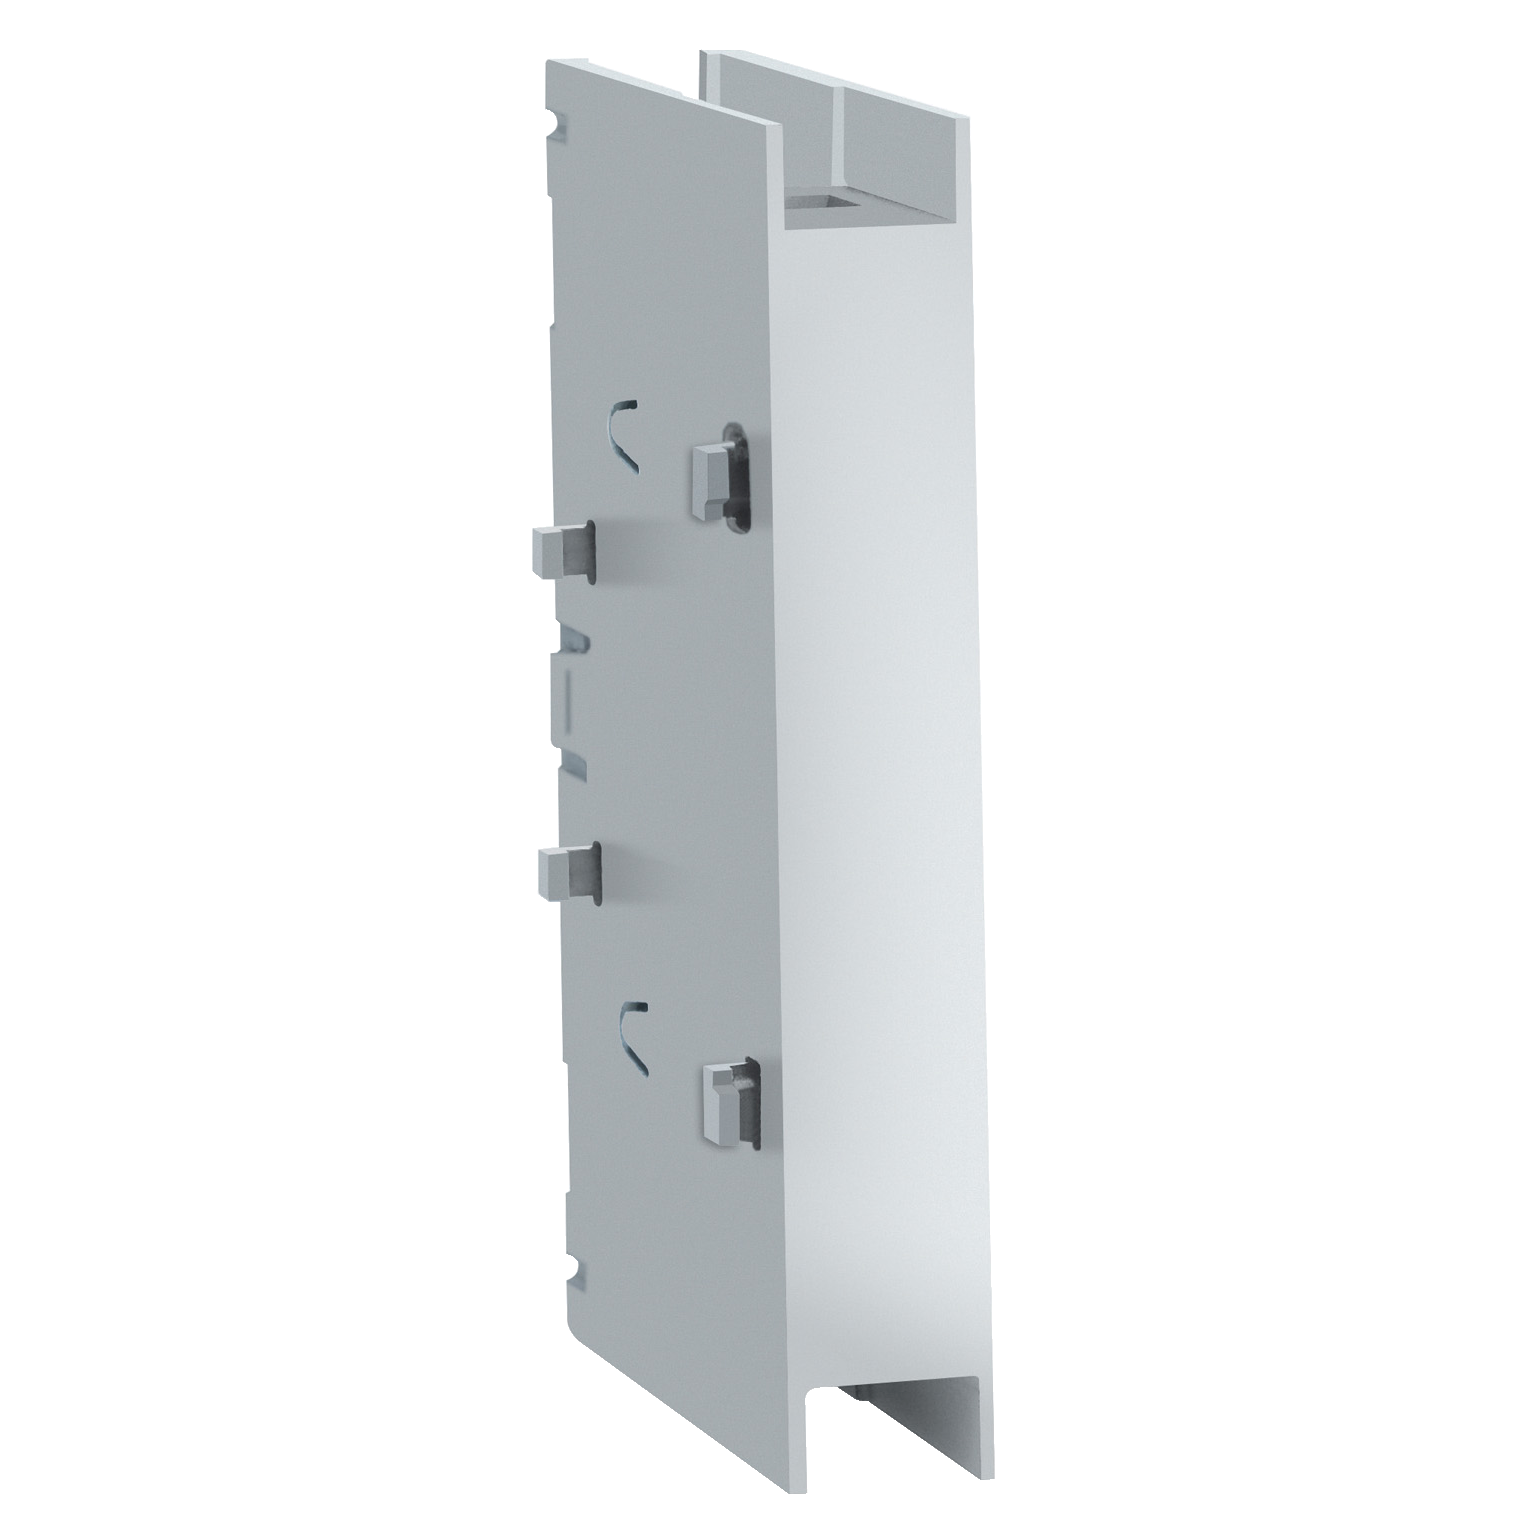 Disconnect switch, TeSys VLS, additional earthing ground terminal, for 30A to 125A, size 2 (70mm), door mount